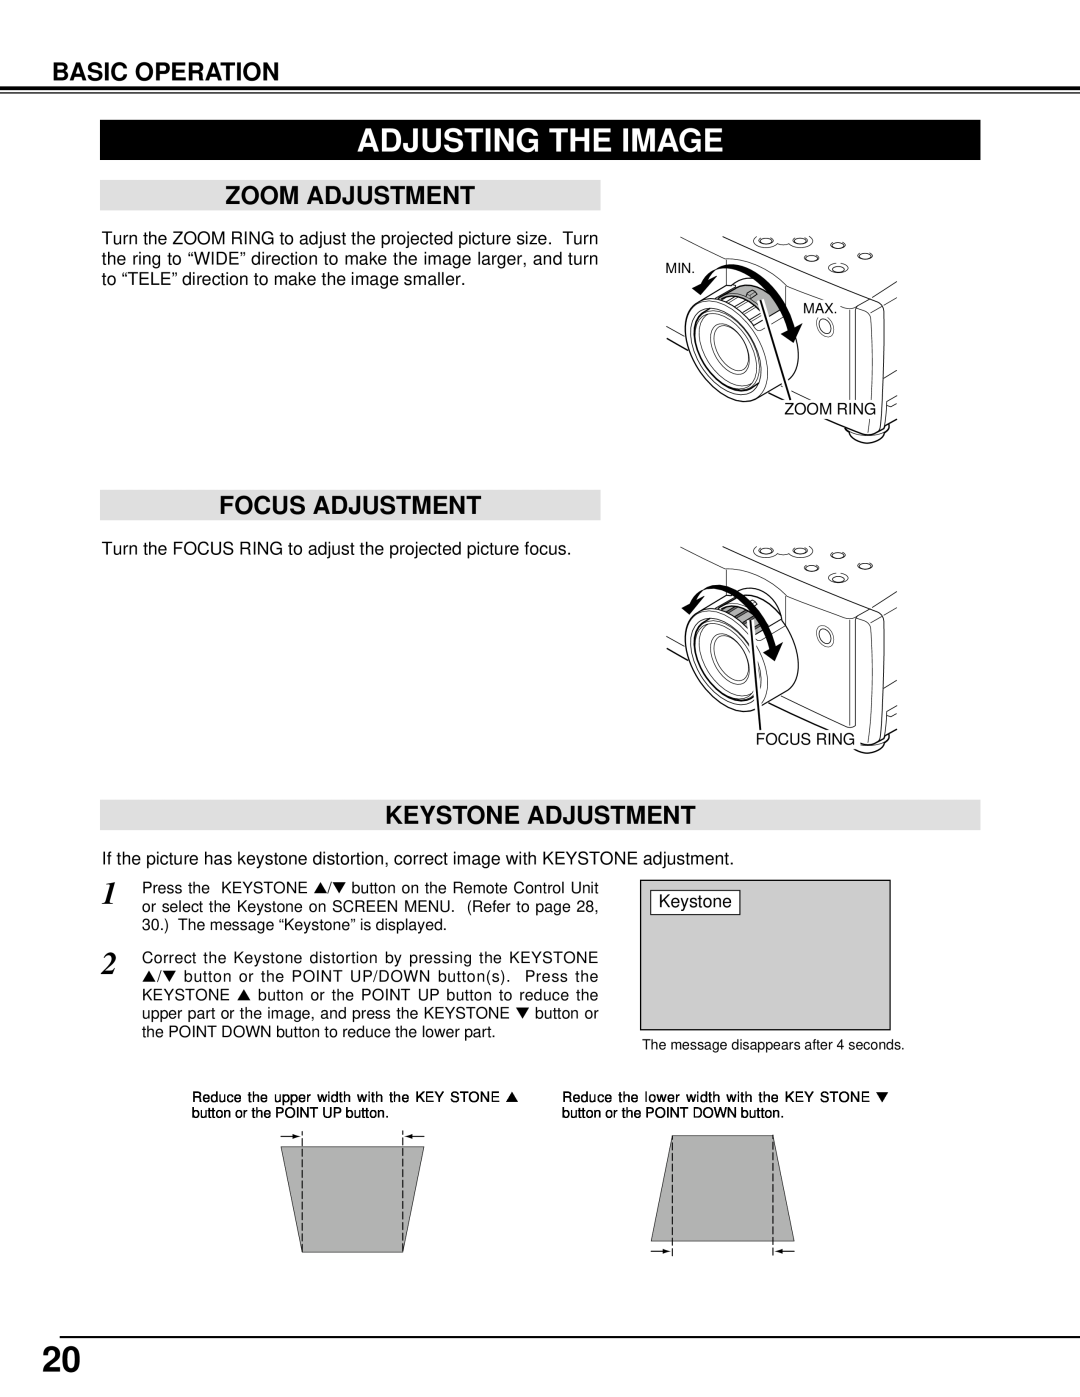 Canon 5100 owner manual Adjusting The Image, Zoom Adjustment, Focus Adjustment, Keystone Adjustment, Basic Operation 